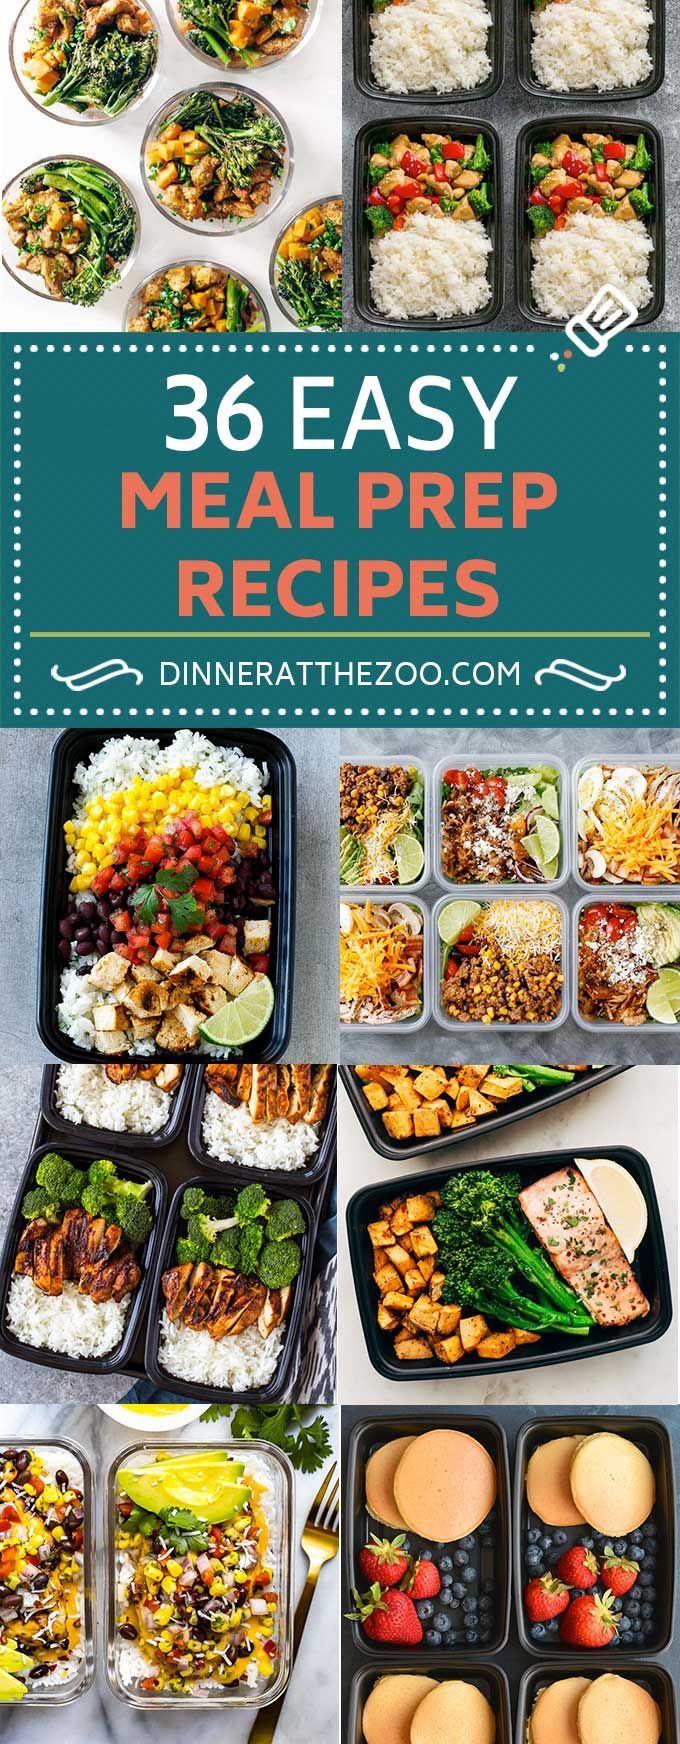 36 Easy Meal Prep Recipes - Dinner at the Zoo - 36 Easy Meal Prep Recipes - Dinner at the Zoo -   19 meal prep recipes for weight loss cheap ideas